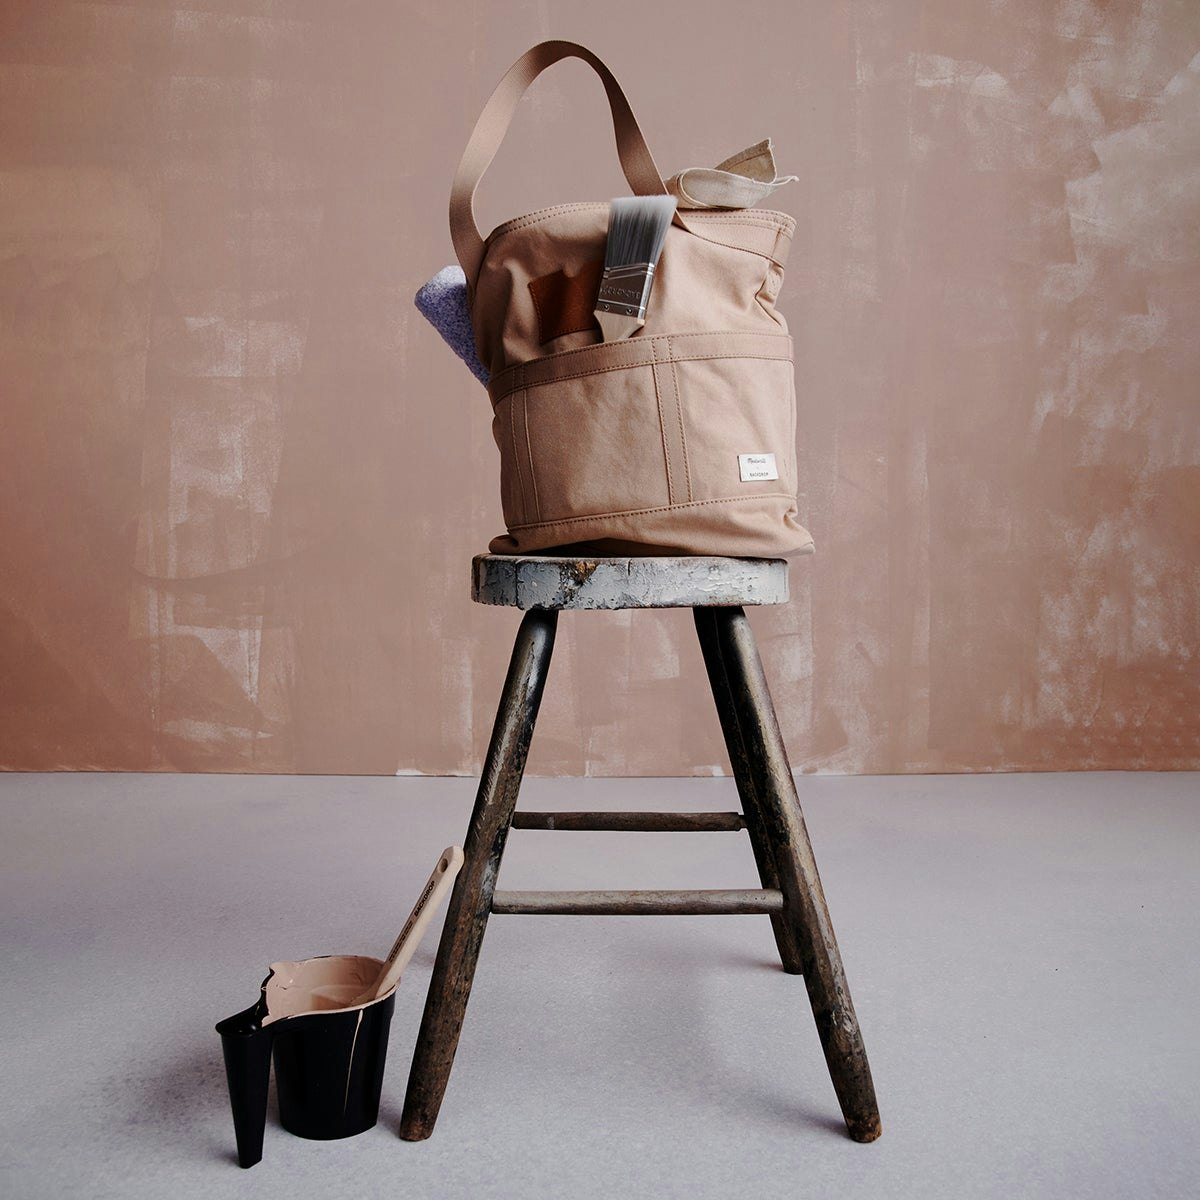 A Madewell bag on a stool. Bag from the Backdrop x Madewell collection